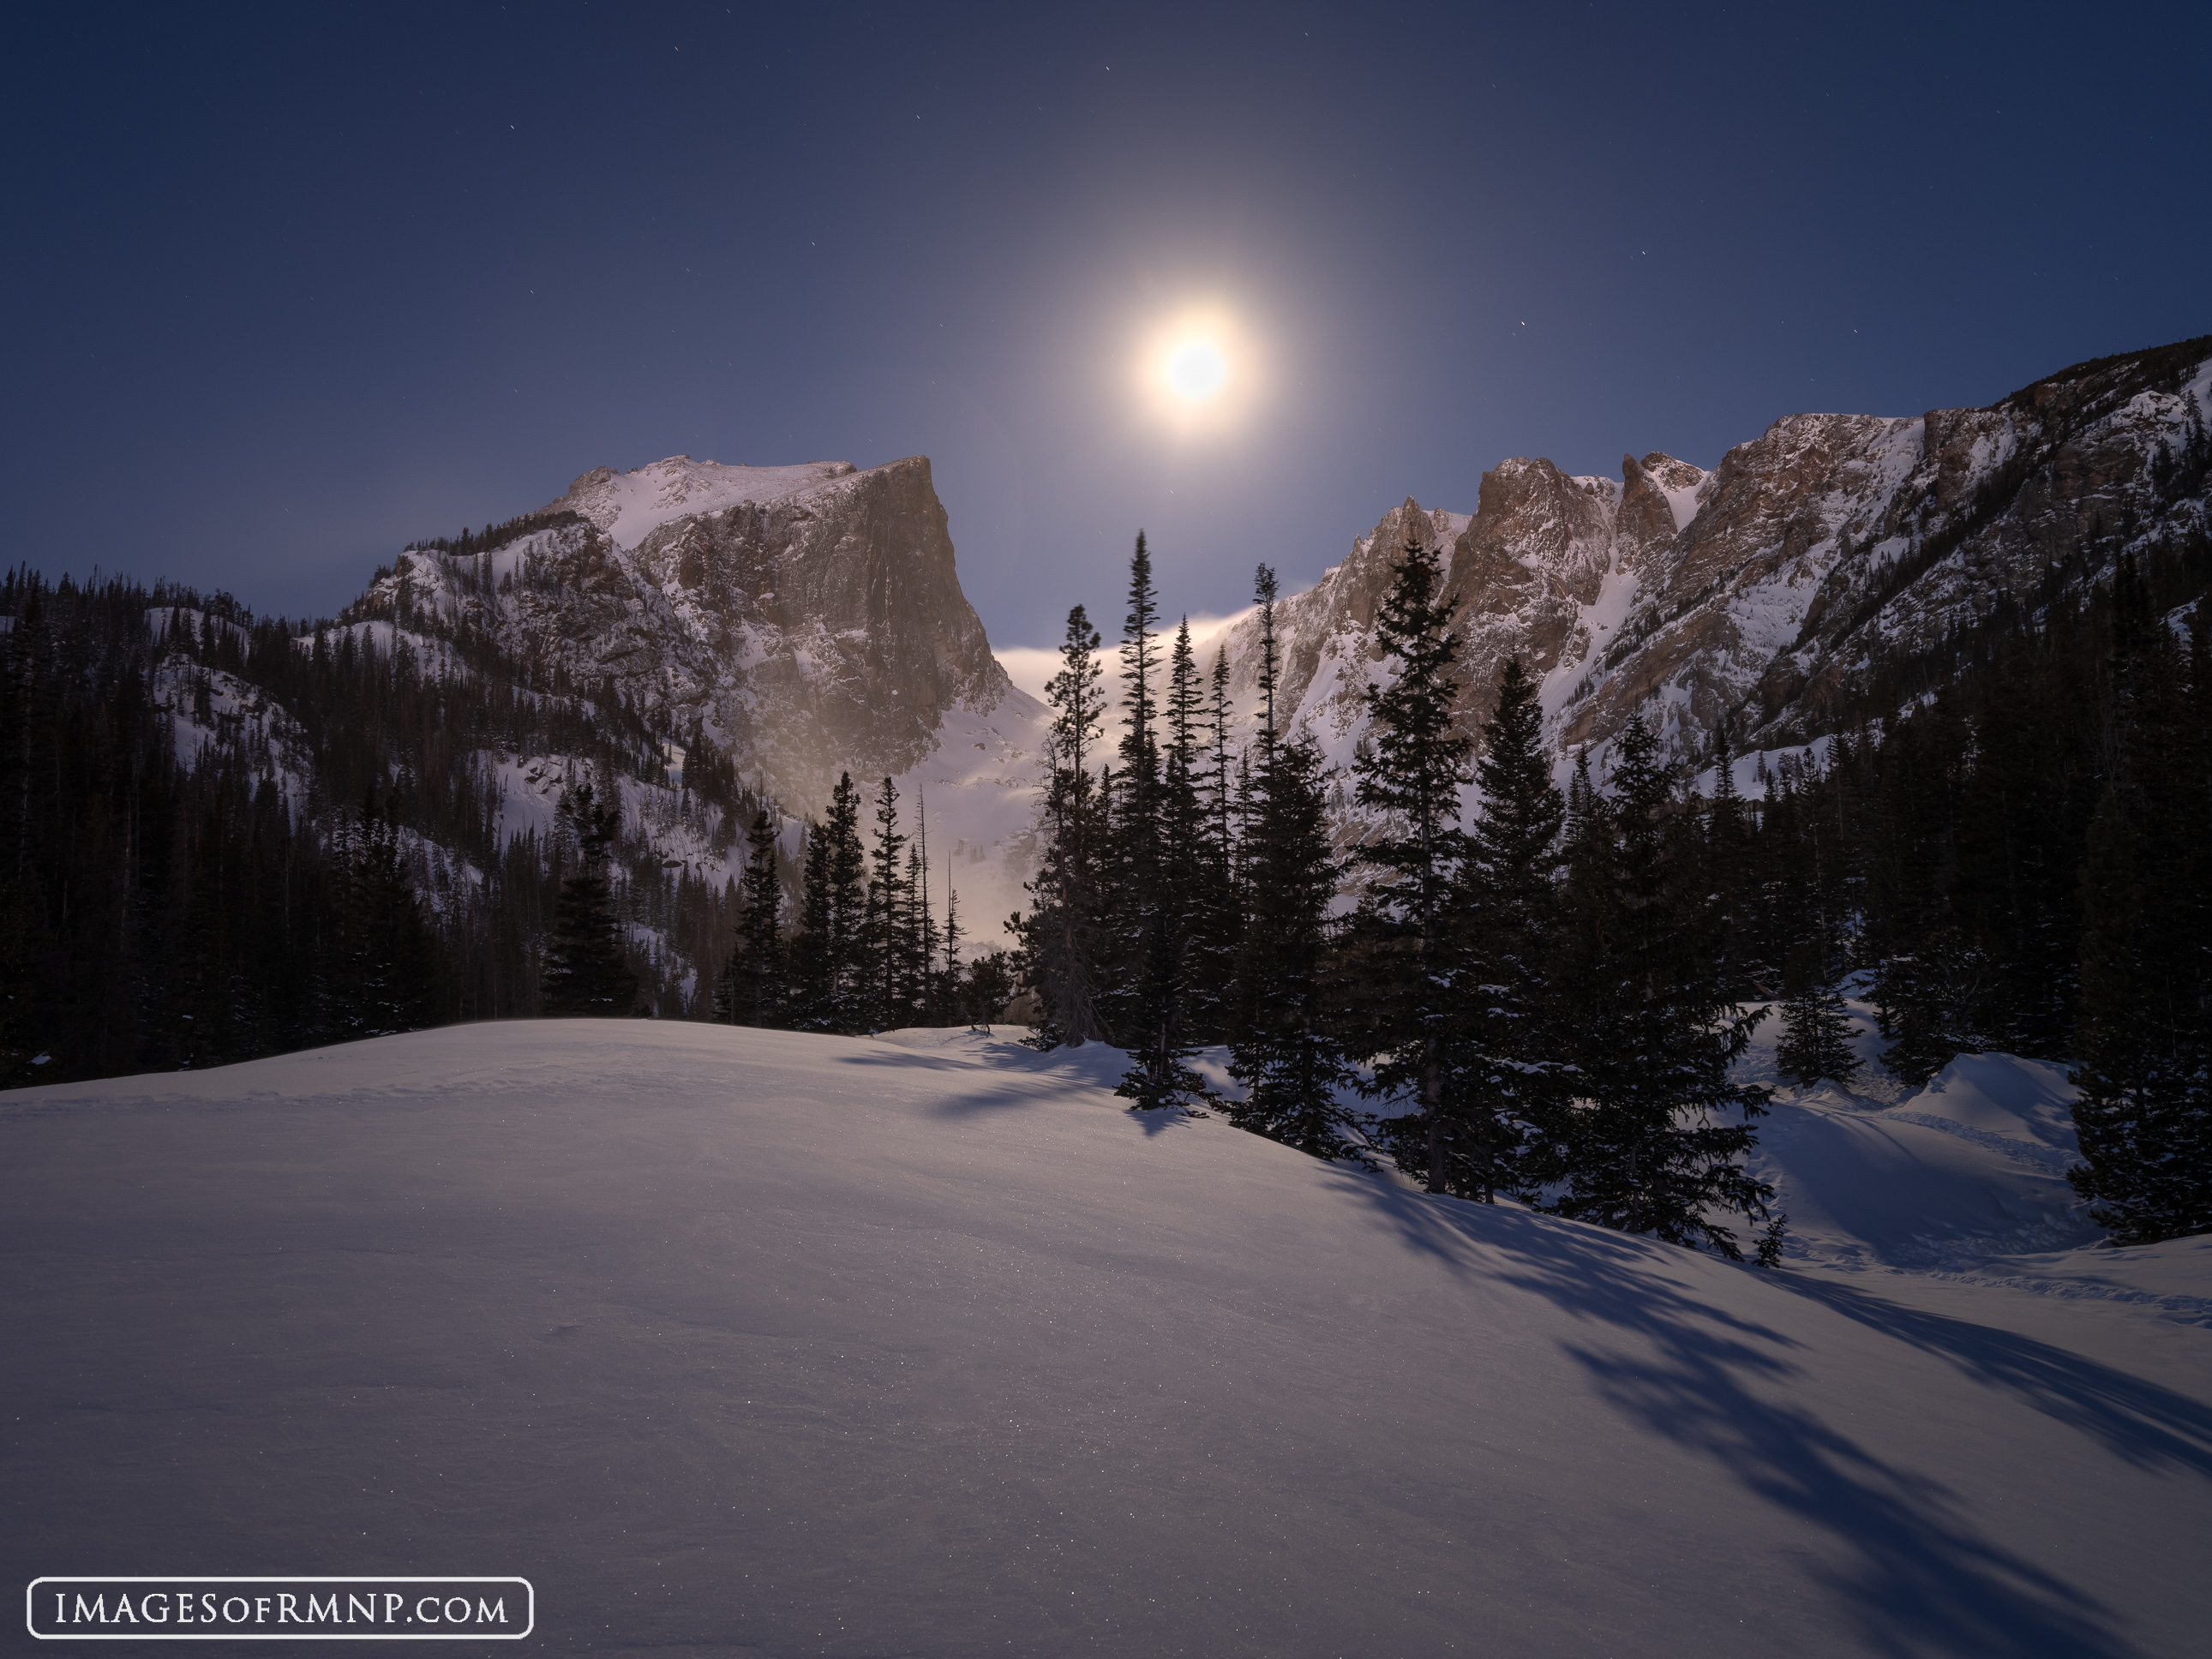 I made this photo on an early February morning in the predawn light as the moon set between Hallett Peak and Flattop Mountain...